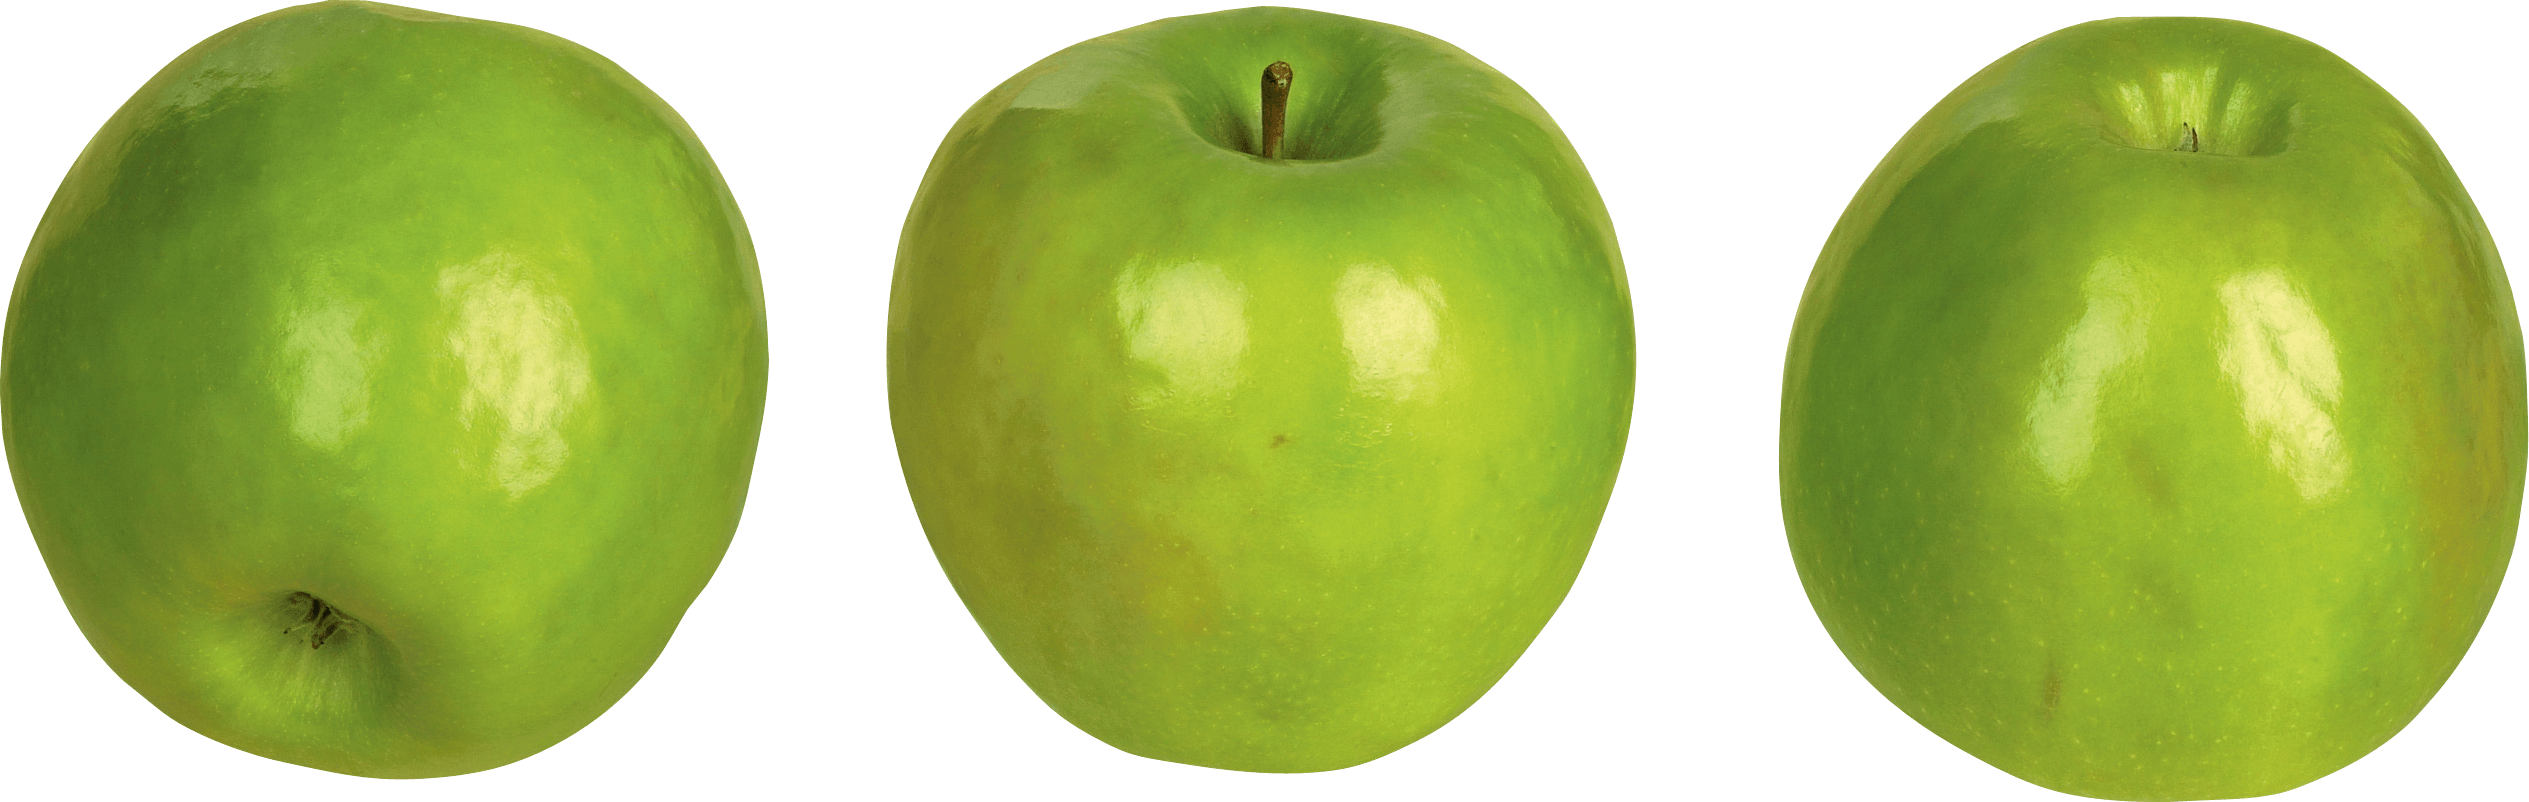 Green Apples Png Image PNG Image